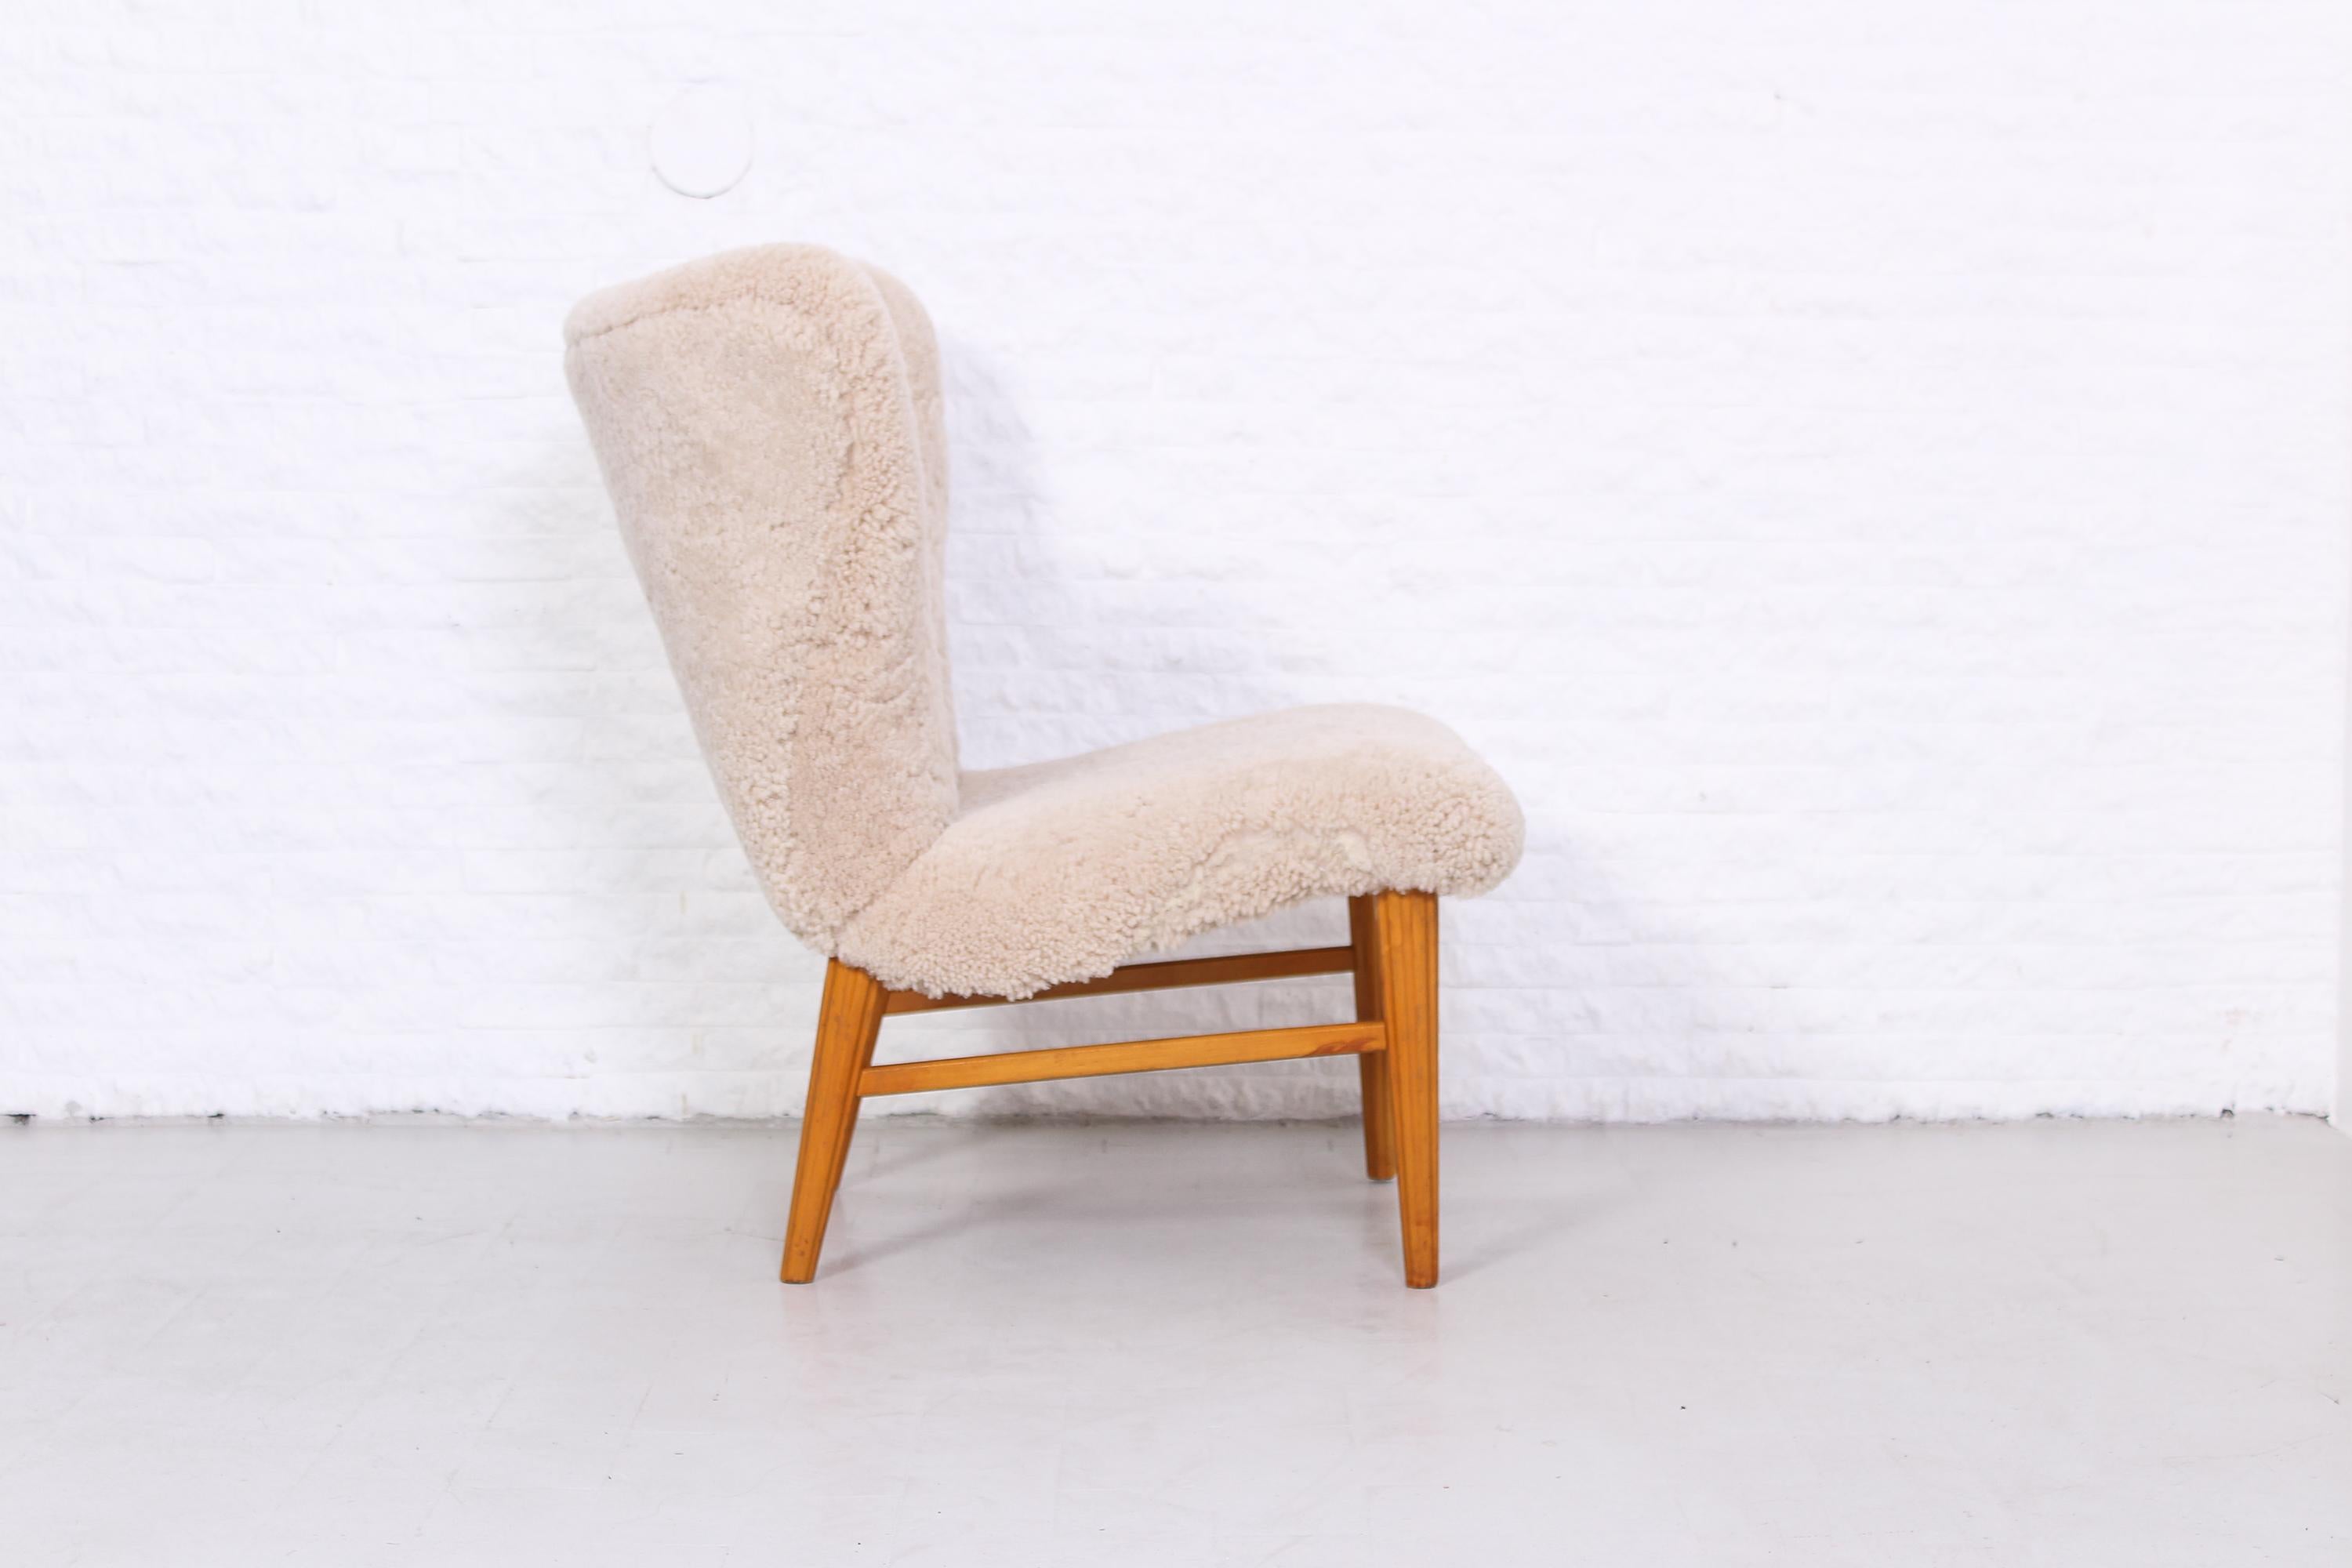 A Swedish easy chair, most likely designed by Eric Carlén. Manufactured in the 1940s with new sheepskin upholstery. This beautiful chair has many interesting features such as the large curved backrest. Very good vintage condition with new upholstery.